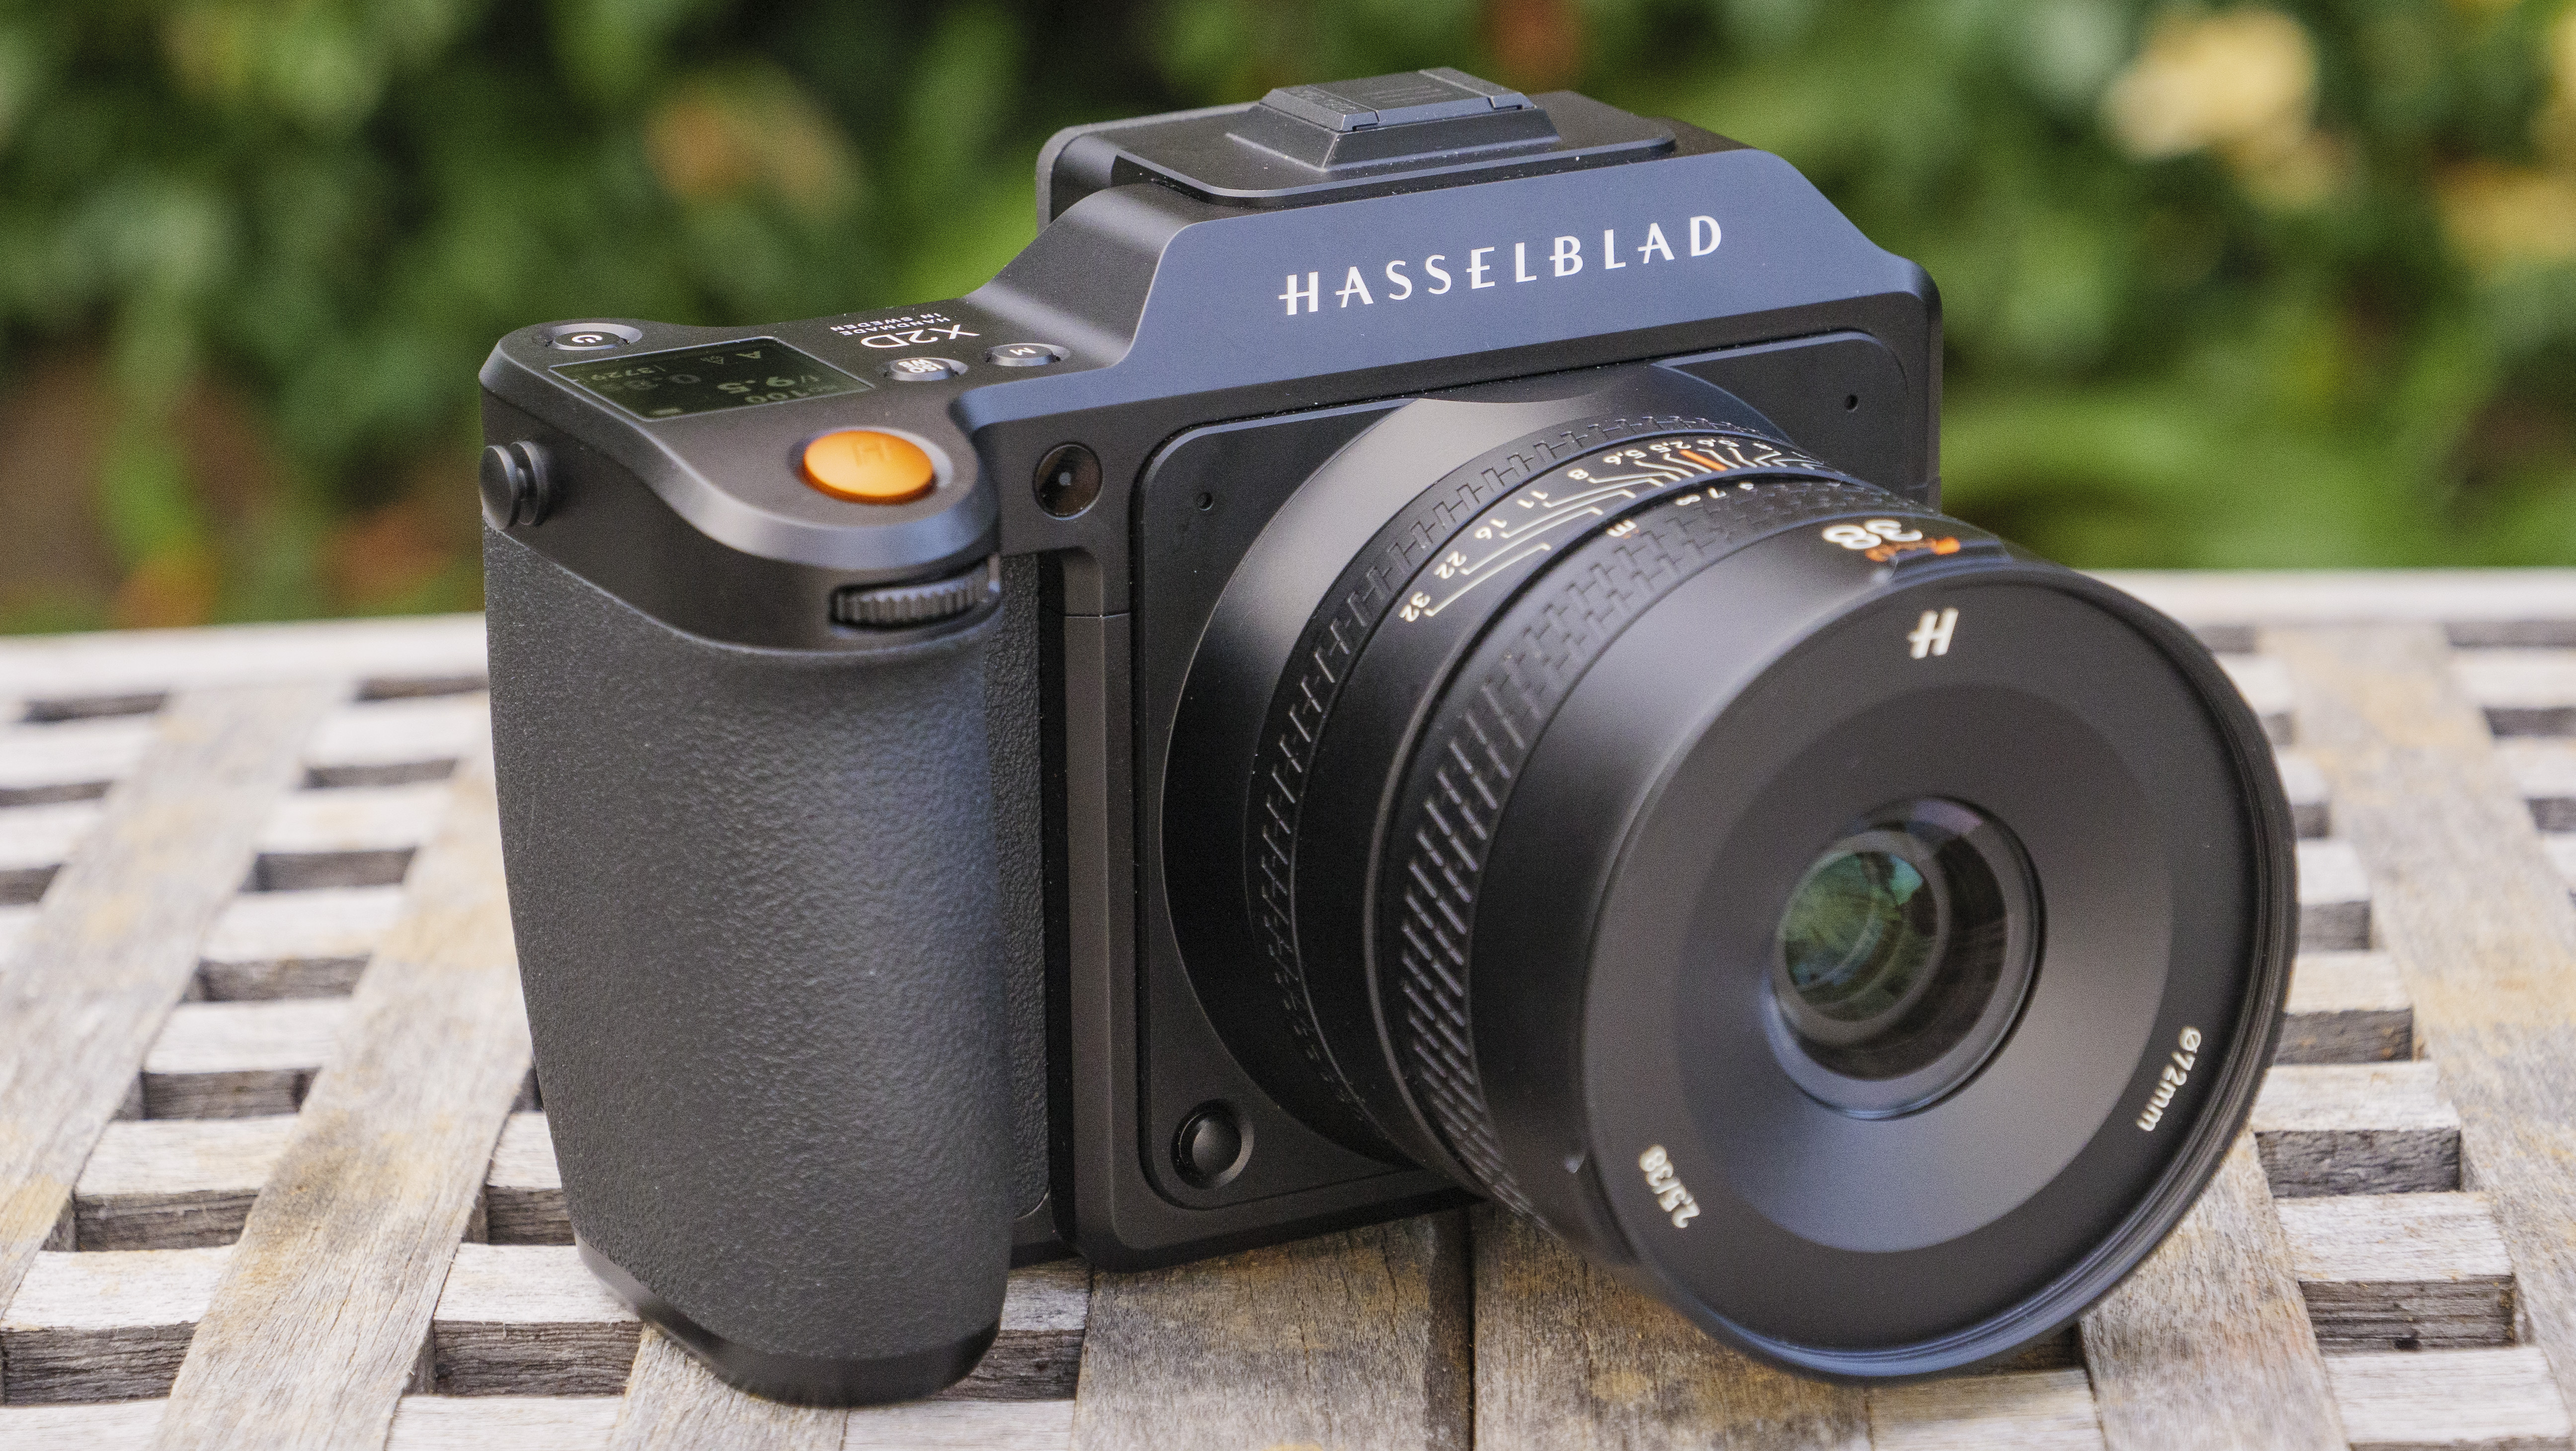 The Hasselblad X2D 100C camera on a table